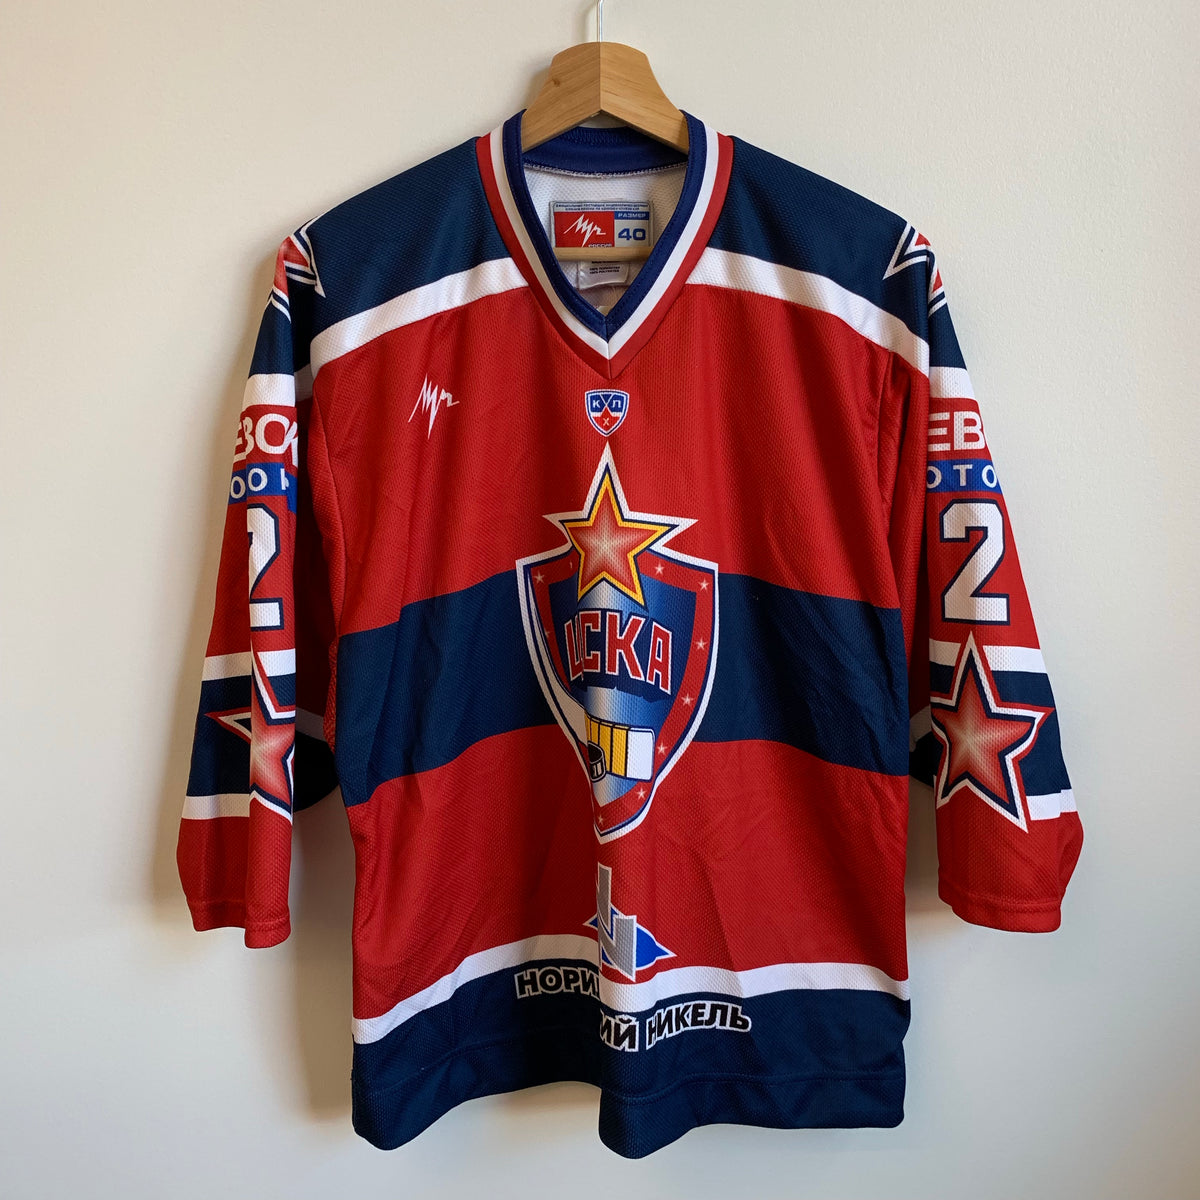 Montreal Canadiens Jersey Youth L/XL